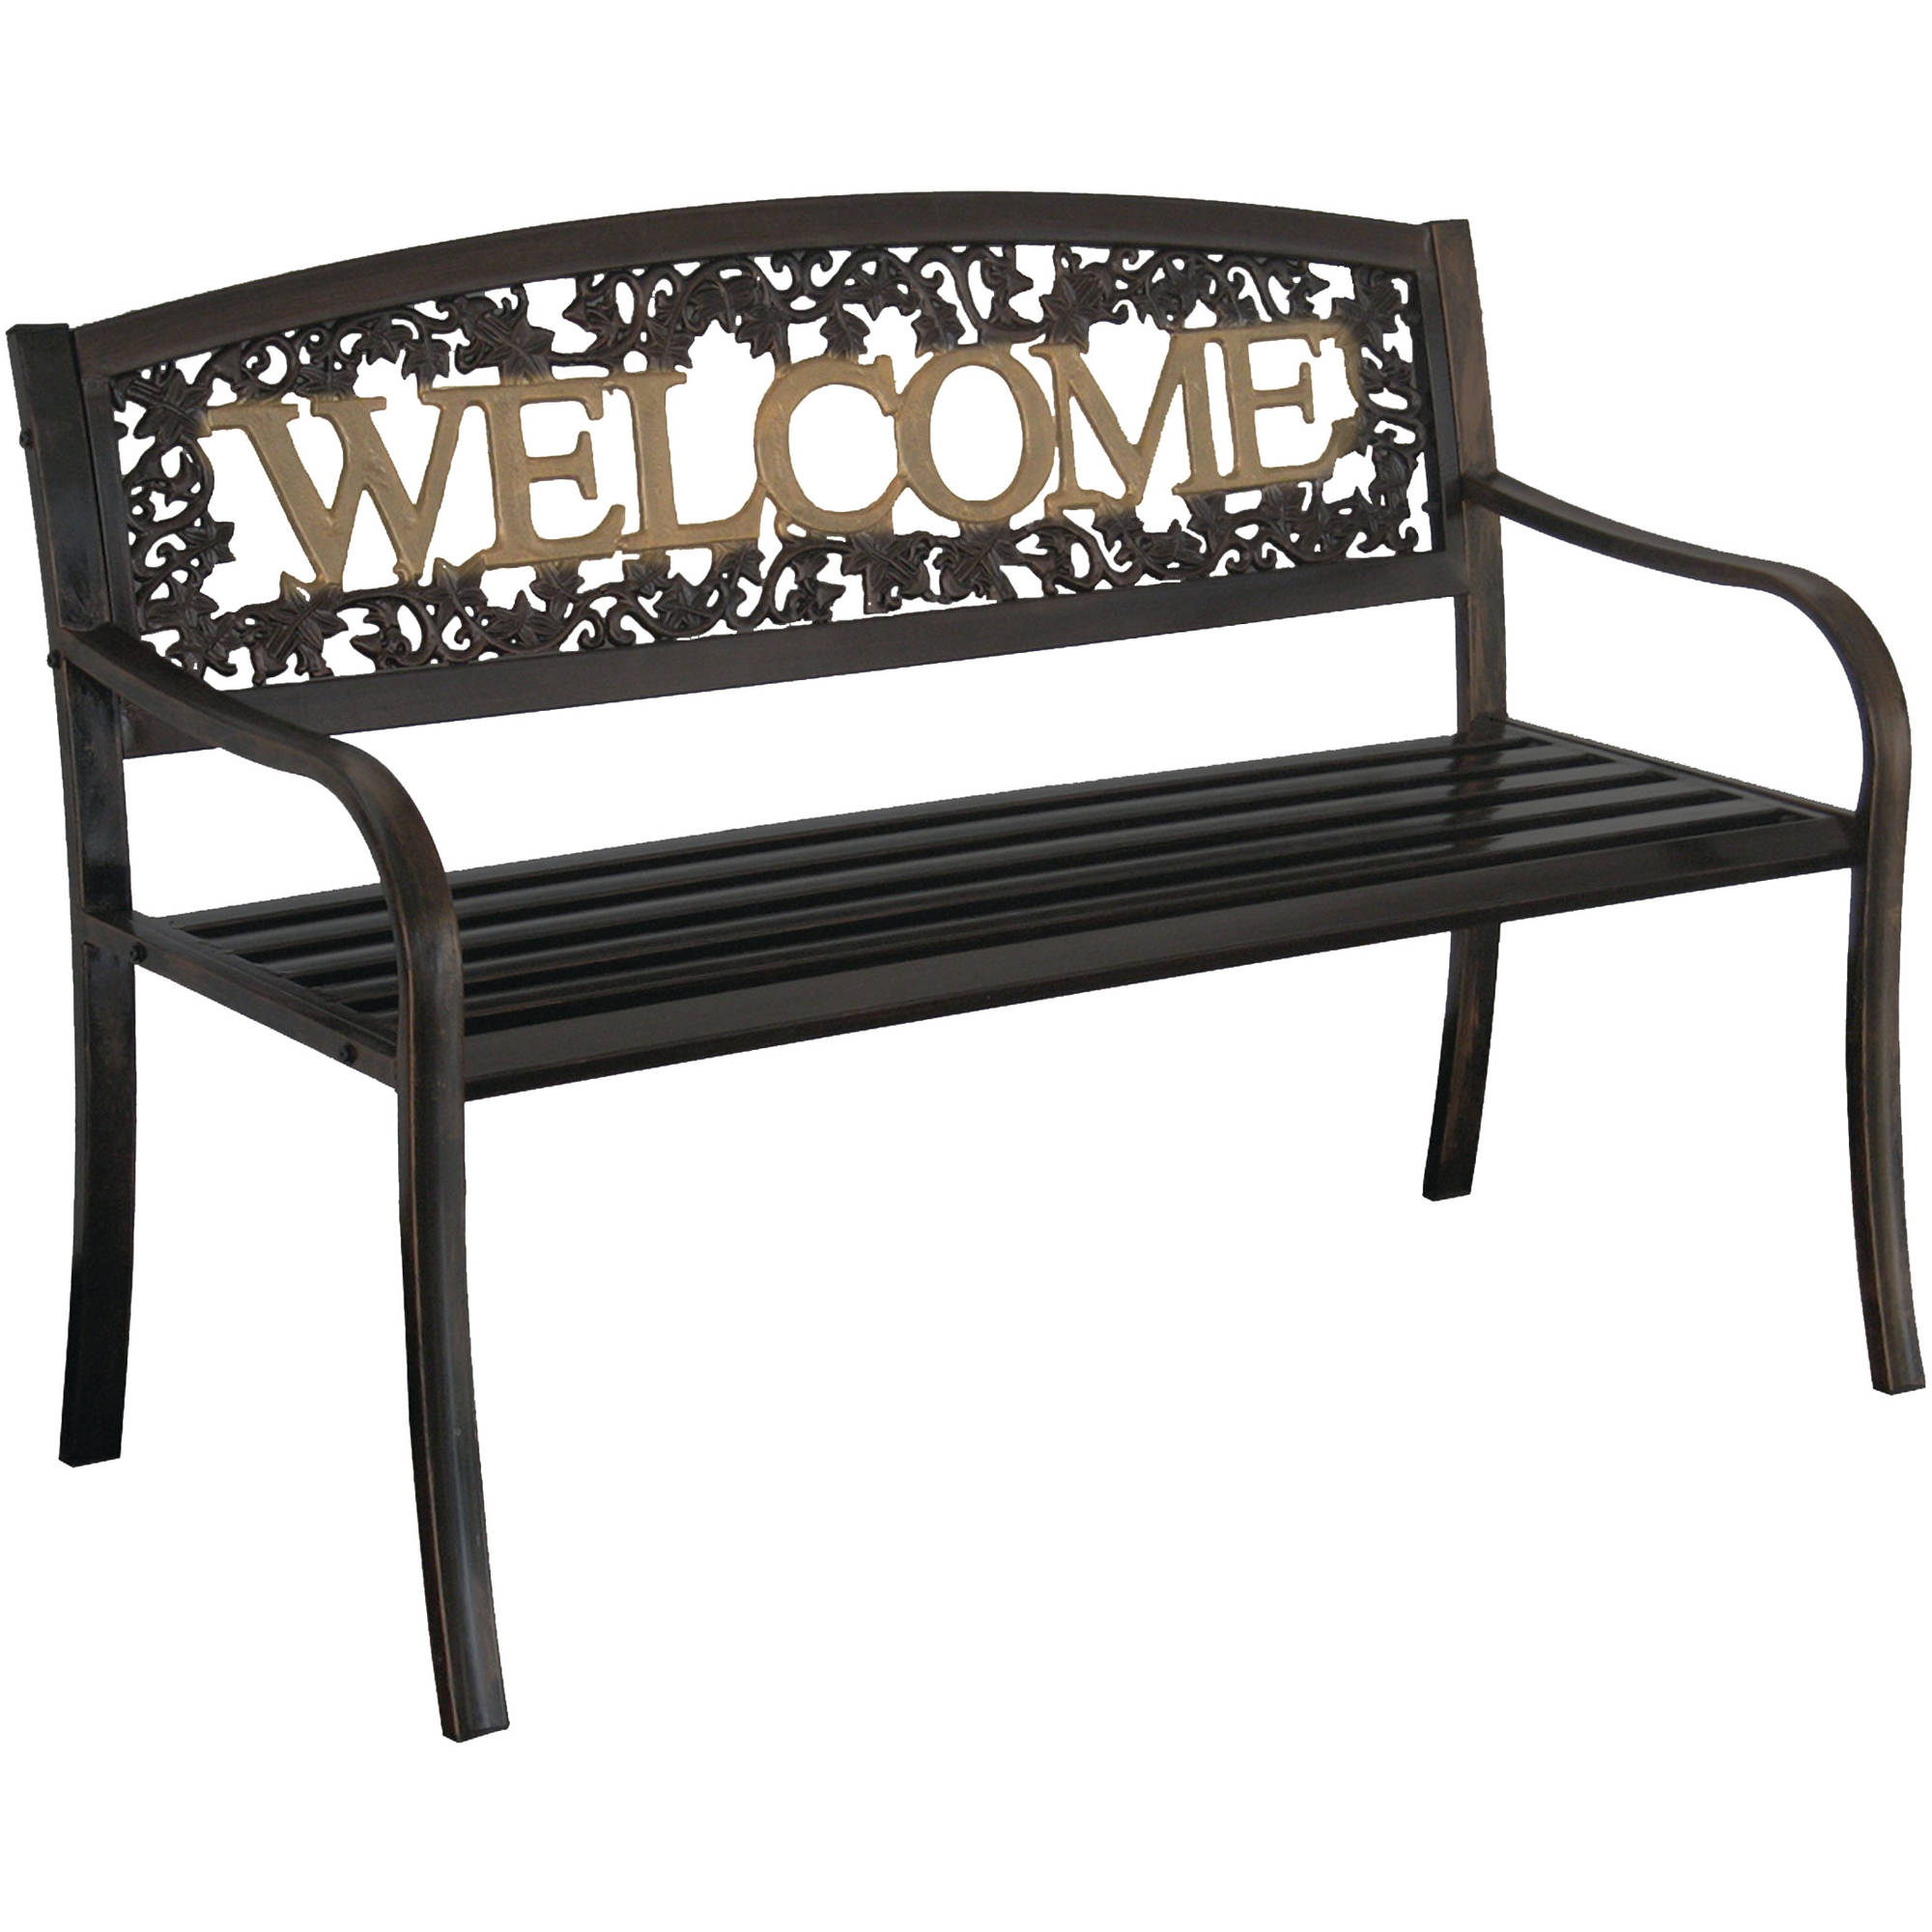 Leigh Country TX 94108 Adult Outdoor Metal Welcome Patio Bench - Black and Gold - image 1 of 5